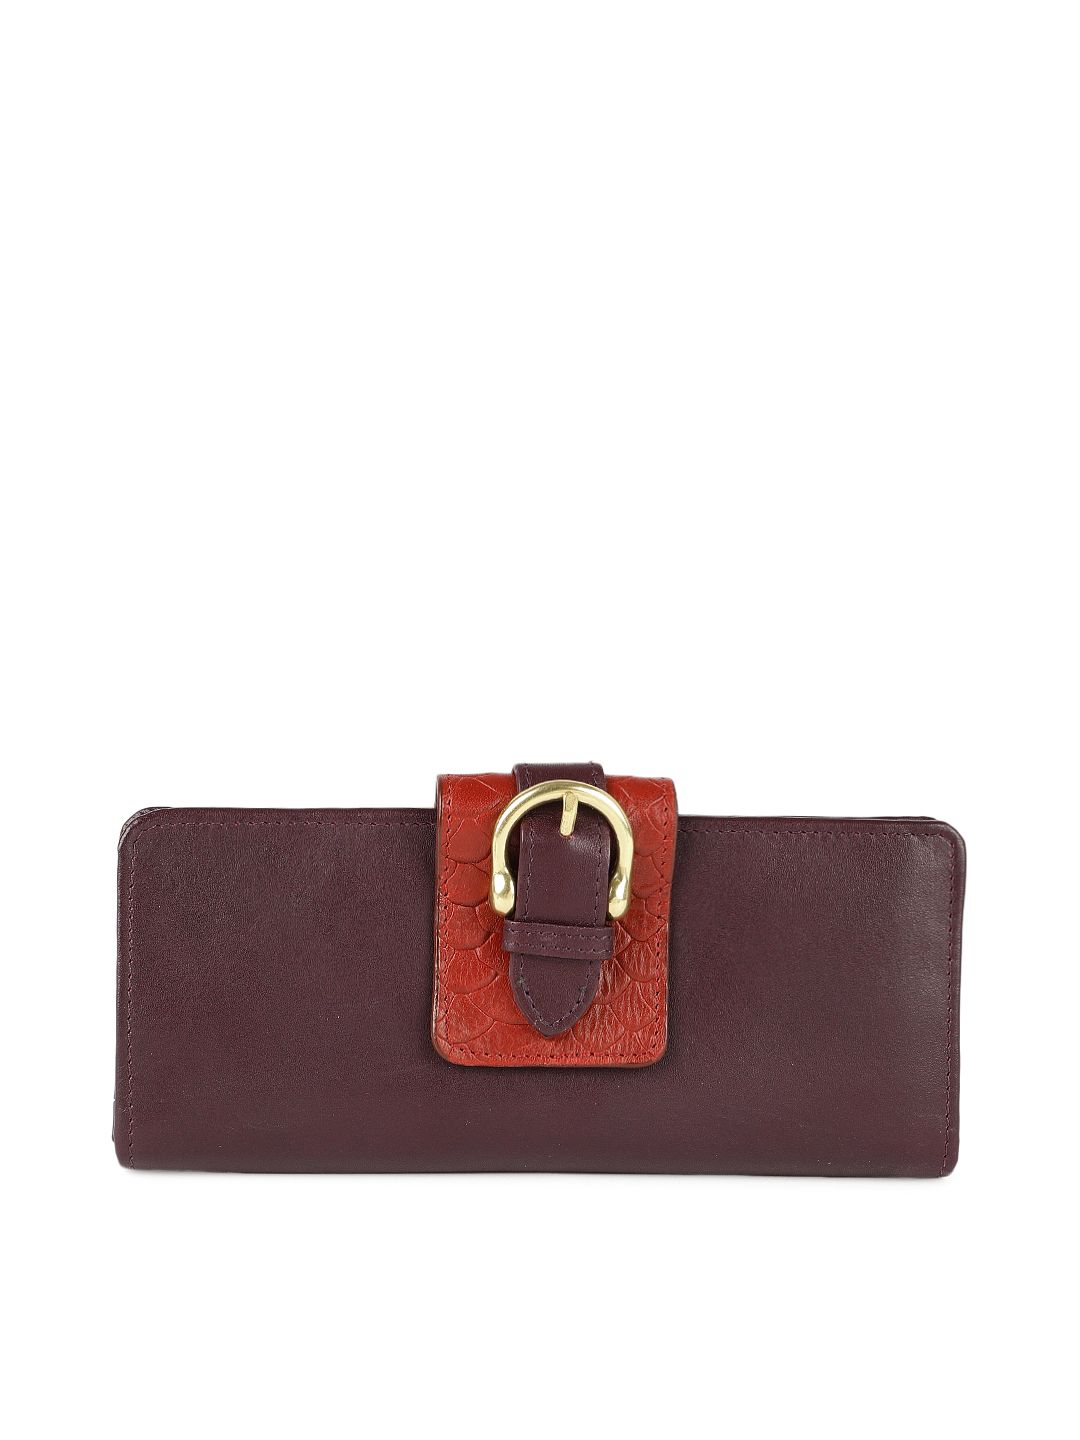 Hidesign Women Red Solid Leather Two Fold Wallet Price in India